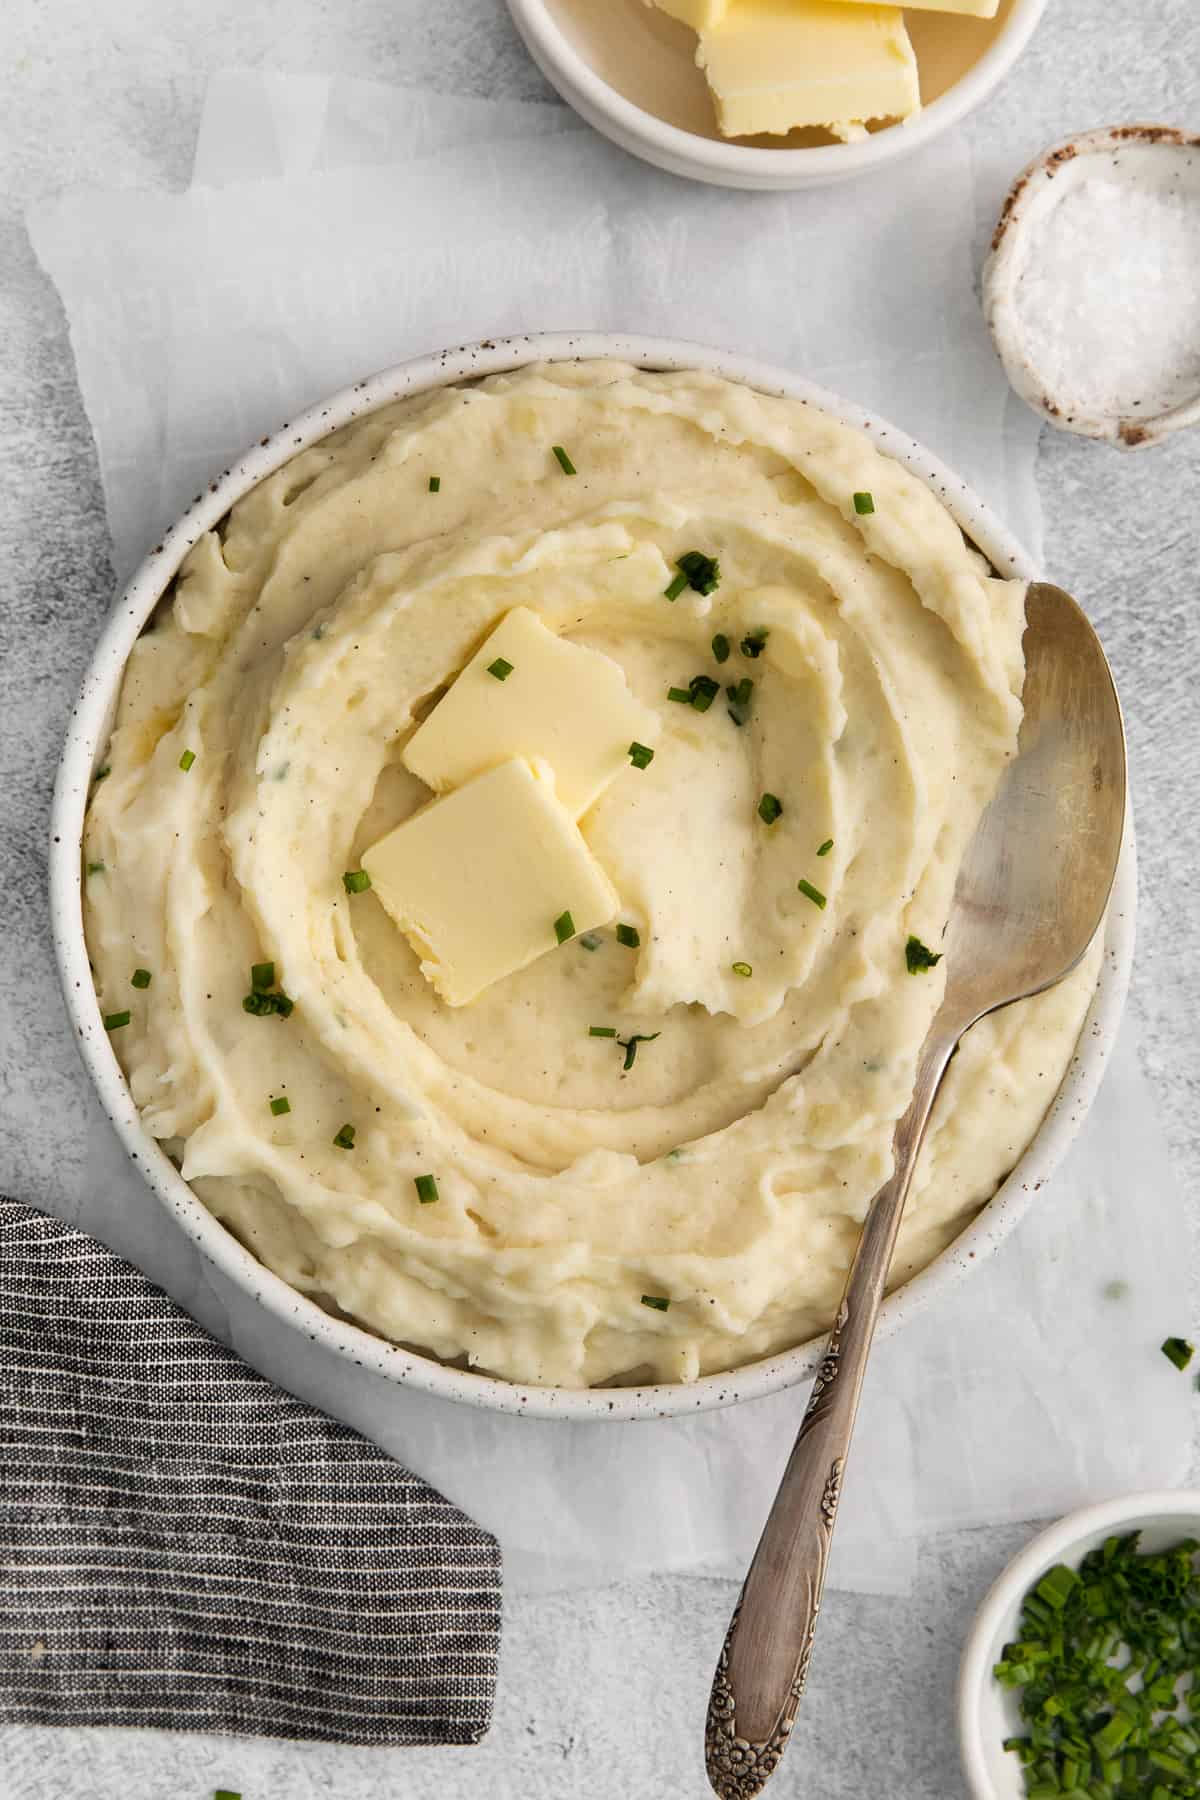 Cream cheese mashed potatoes topped with pads of butter.